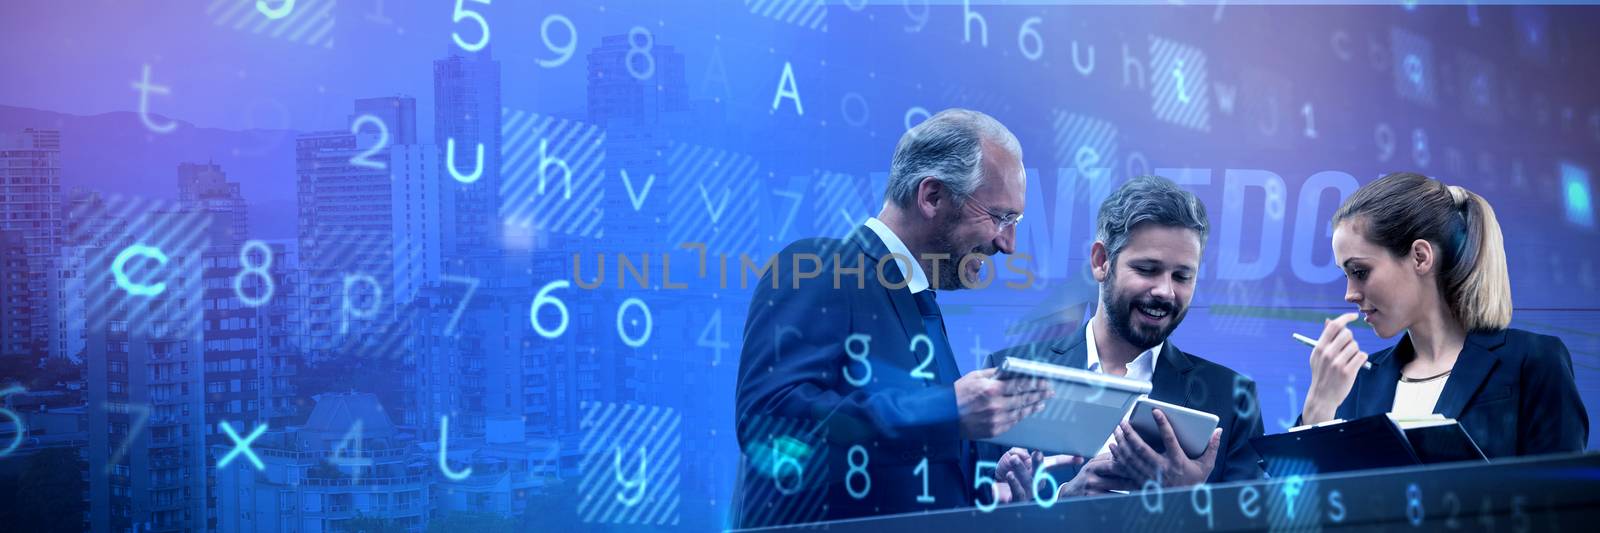 Composite image of colleagues discussing  over technology against white background by Wavebreakmedia